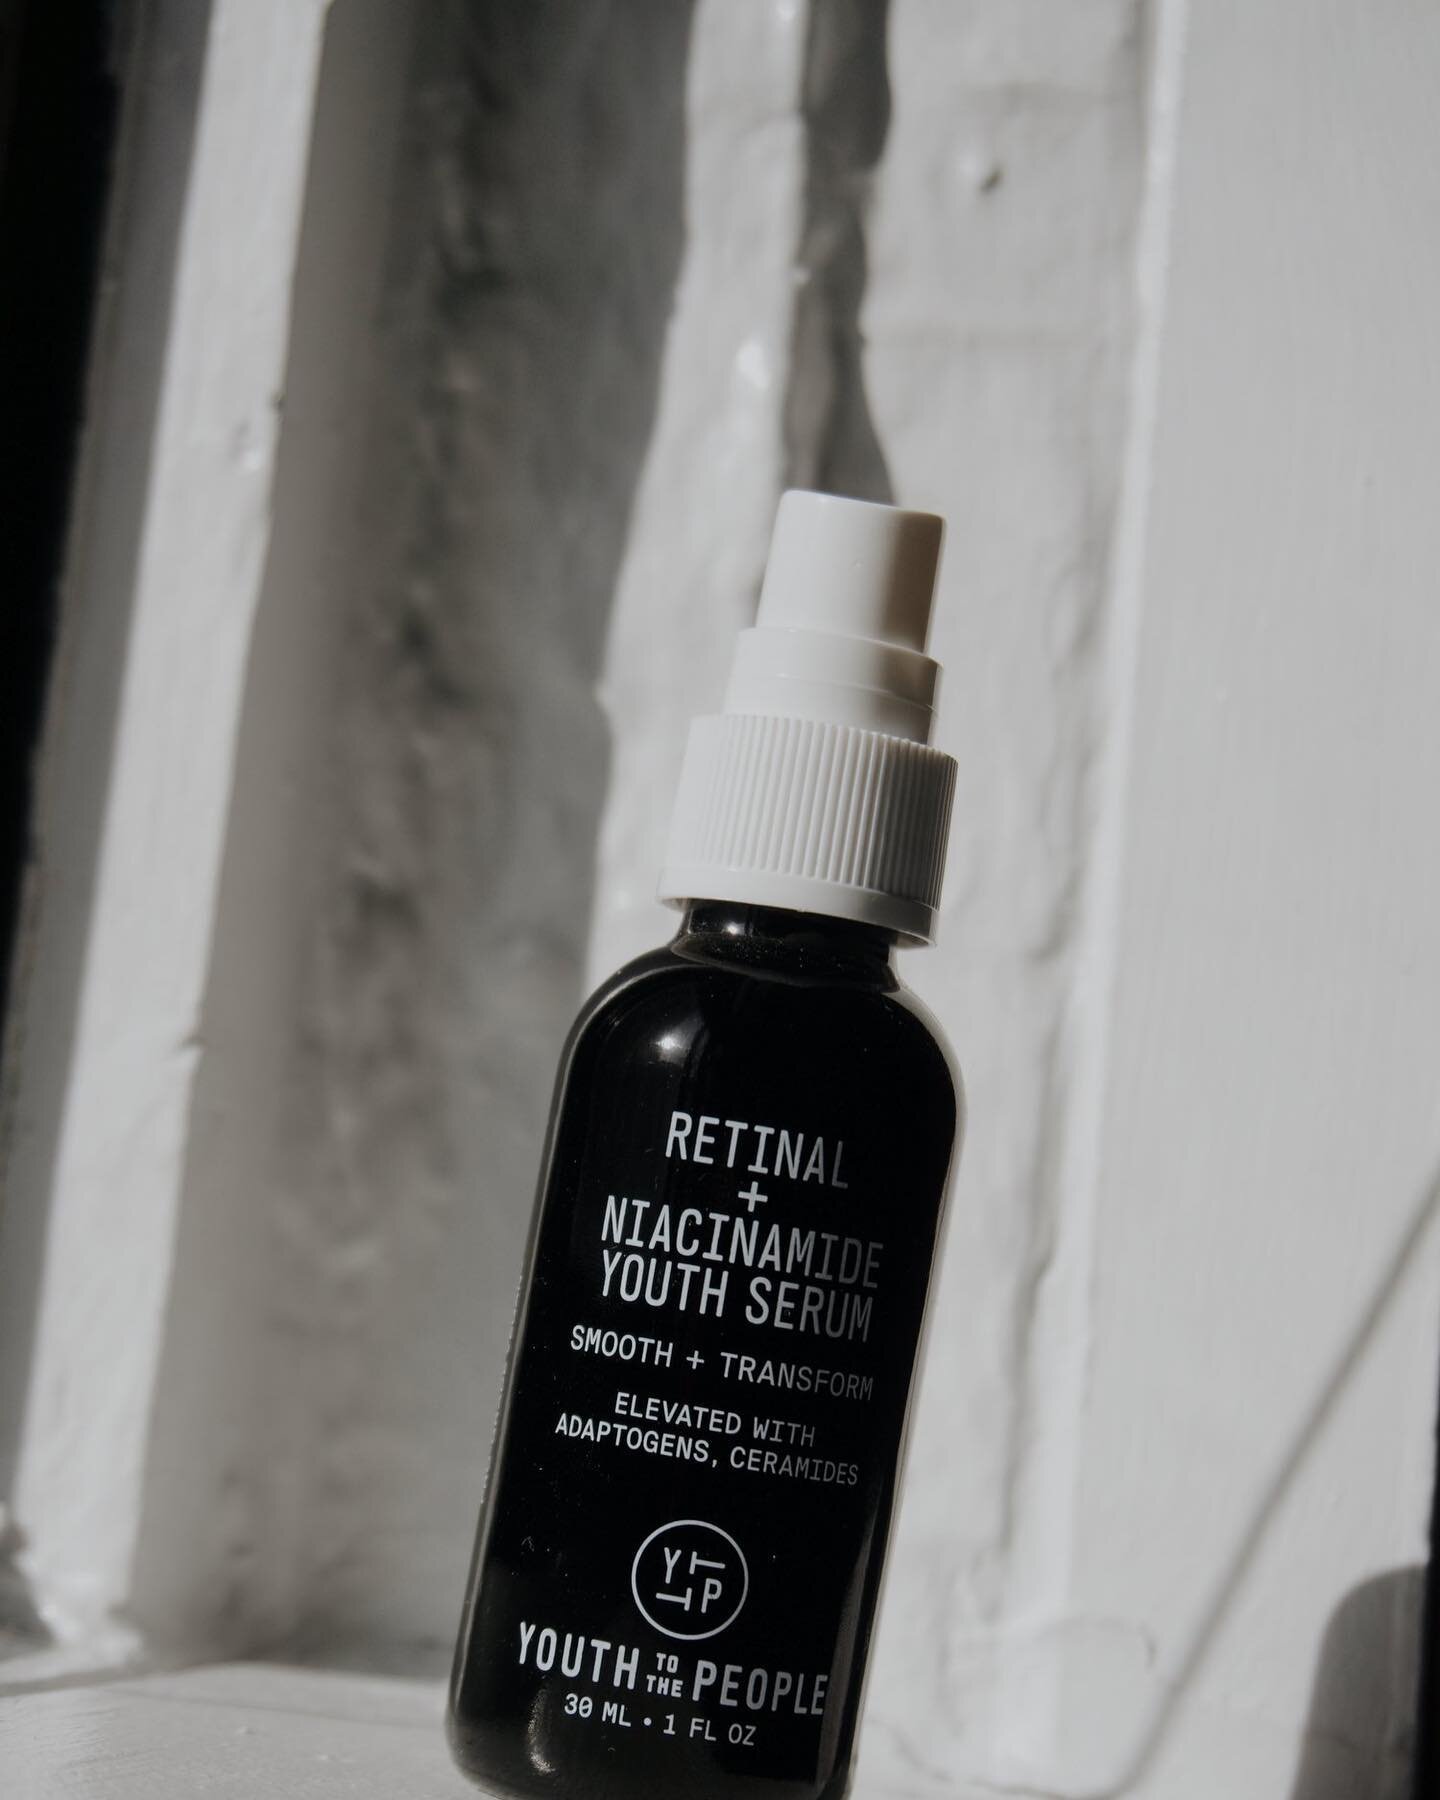 desseydoll x @youthtothepeople - RETINAL GIVEAWAY!

This giveaway is now closed. Congratulations to @mchllllle_ 💐 Sweet world, it's retinal season and I'm so excited to be giving away Youth To The People's Retinal + Niacinamide Youth Serum PR box! O